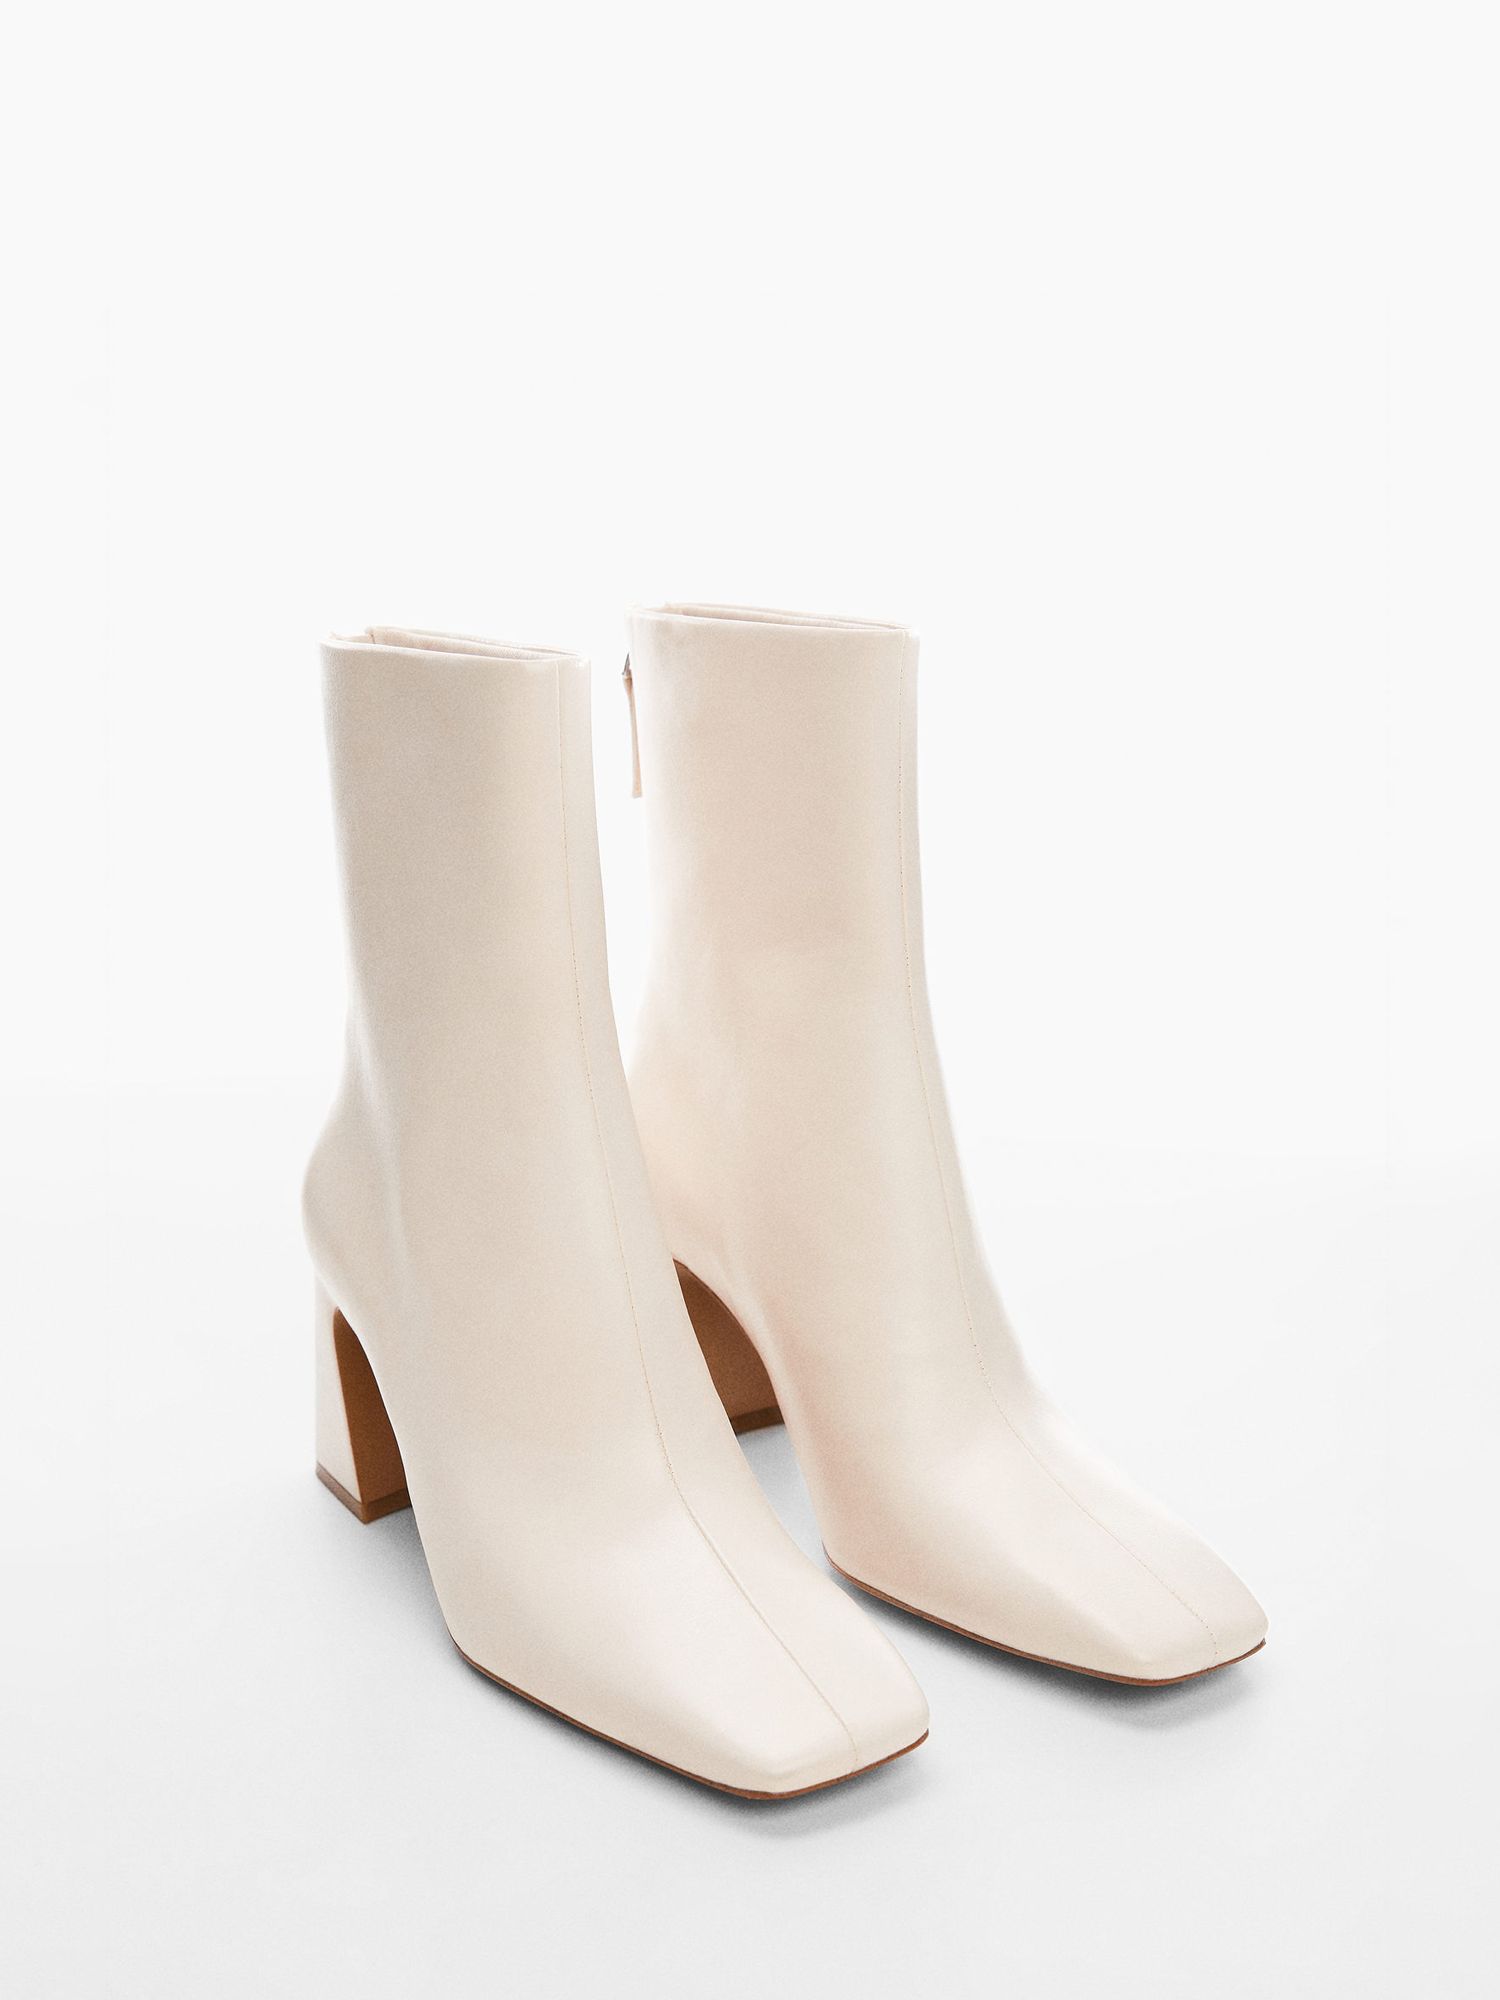 Buy Mango Square Toe Ankle Boots Online at johnlewis.com